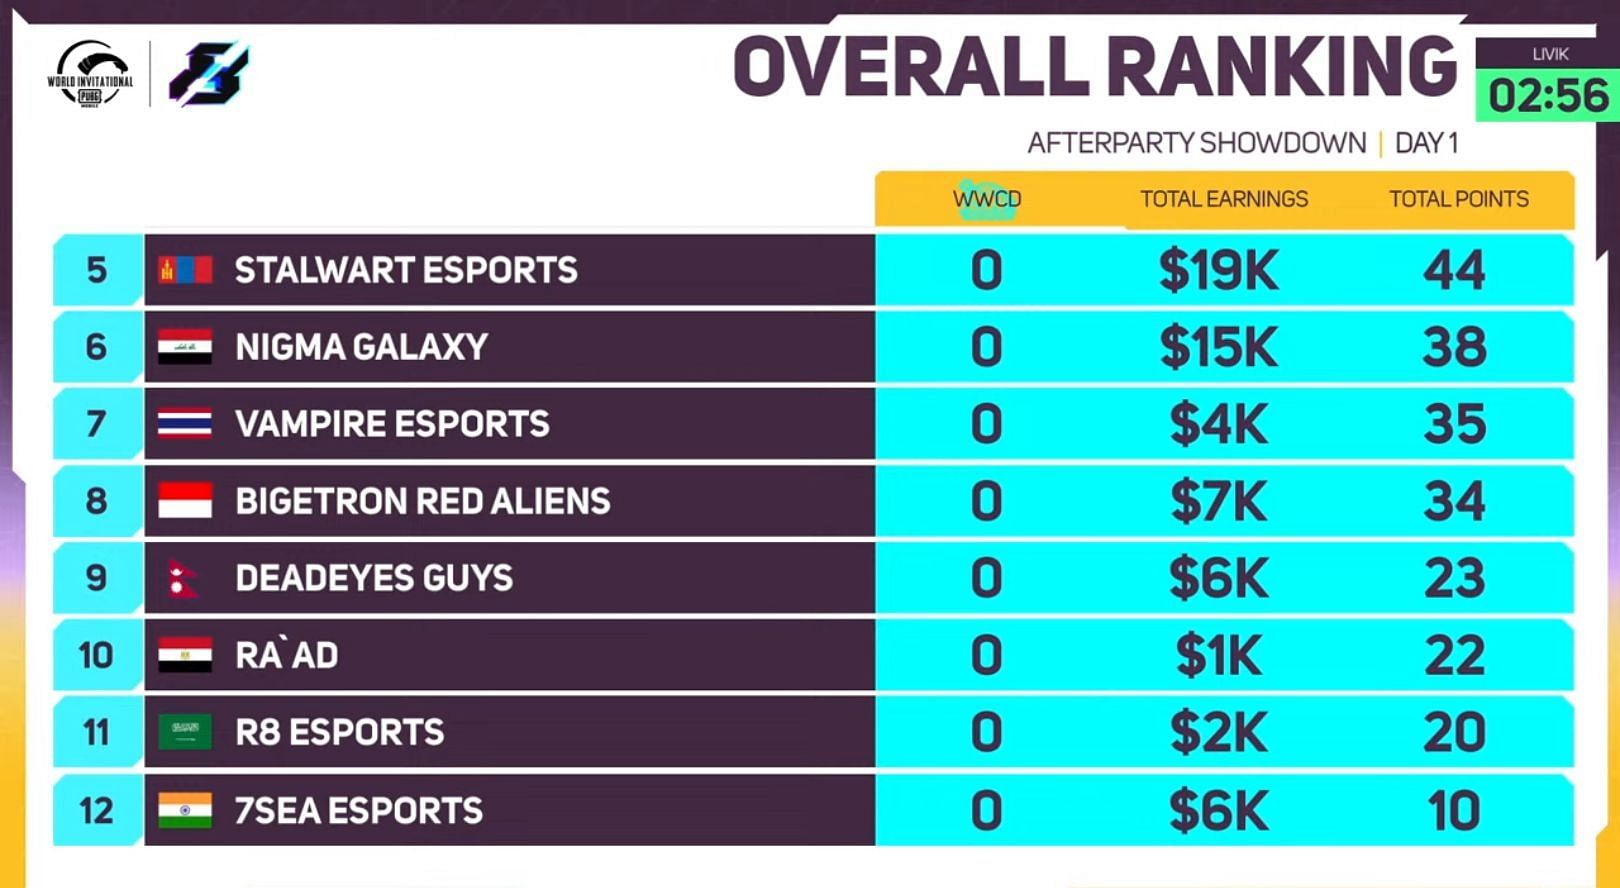 7Sea Esports finished in 12th place after PMWI Afterparty Showdown Day 1 (Image via PUBG Mobile)